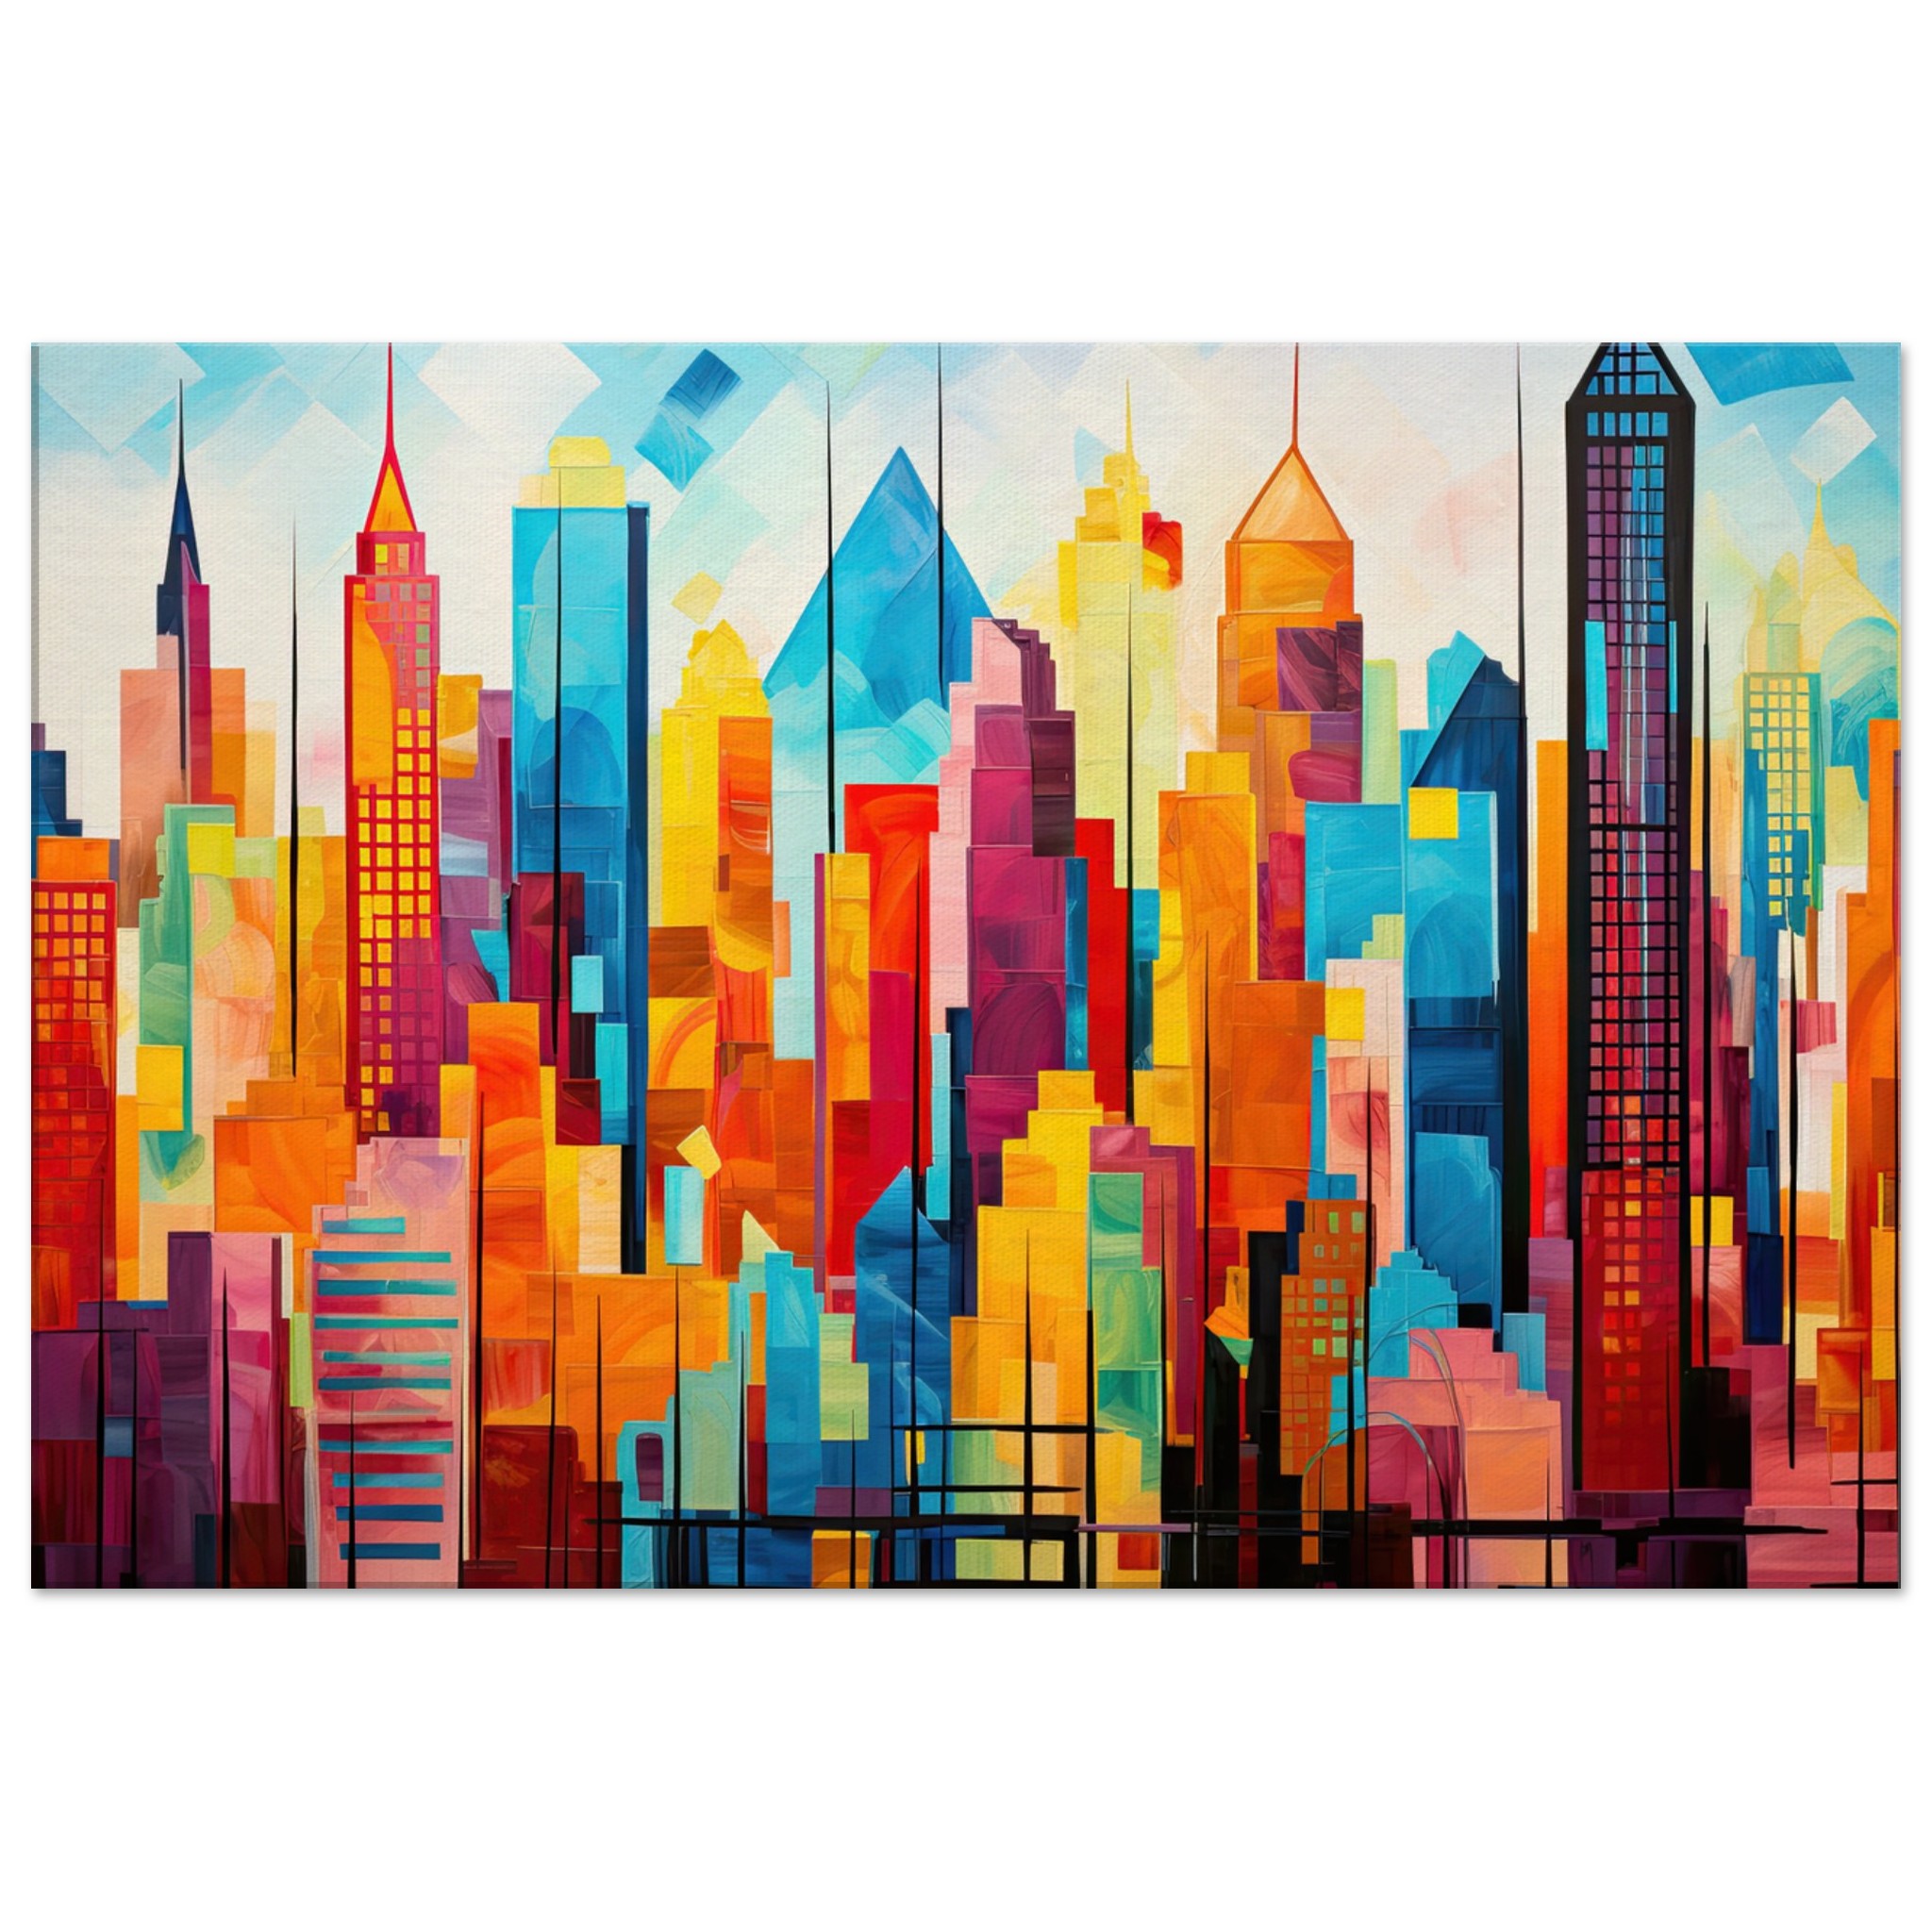 Colorful Abstract Cityscape Painted – Canvas Print – 60×90 cm / 24×36″, Slim